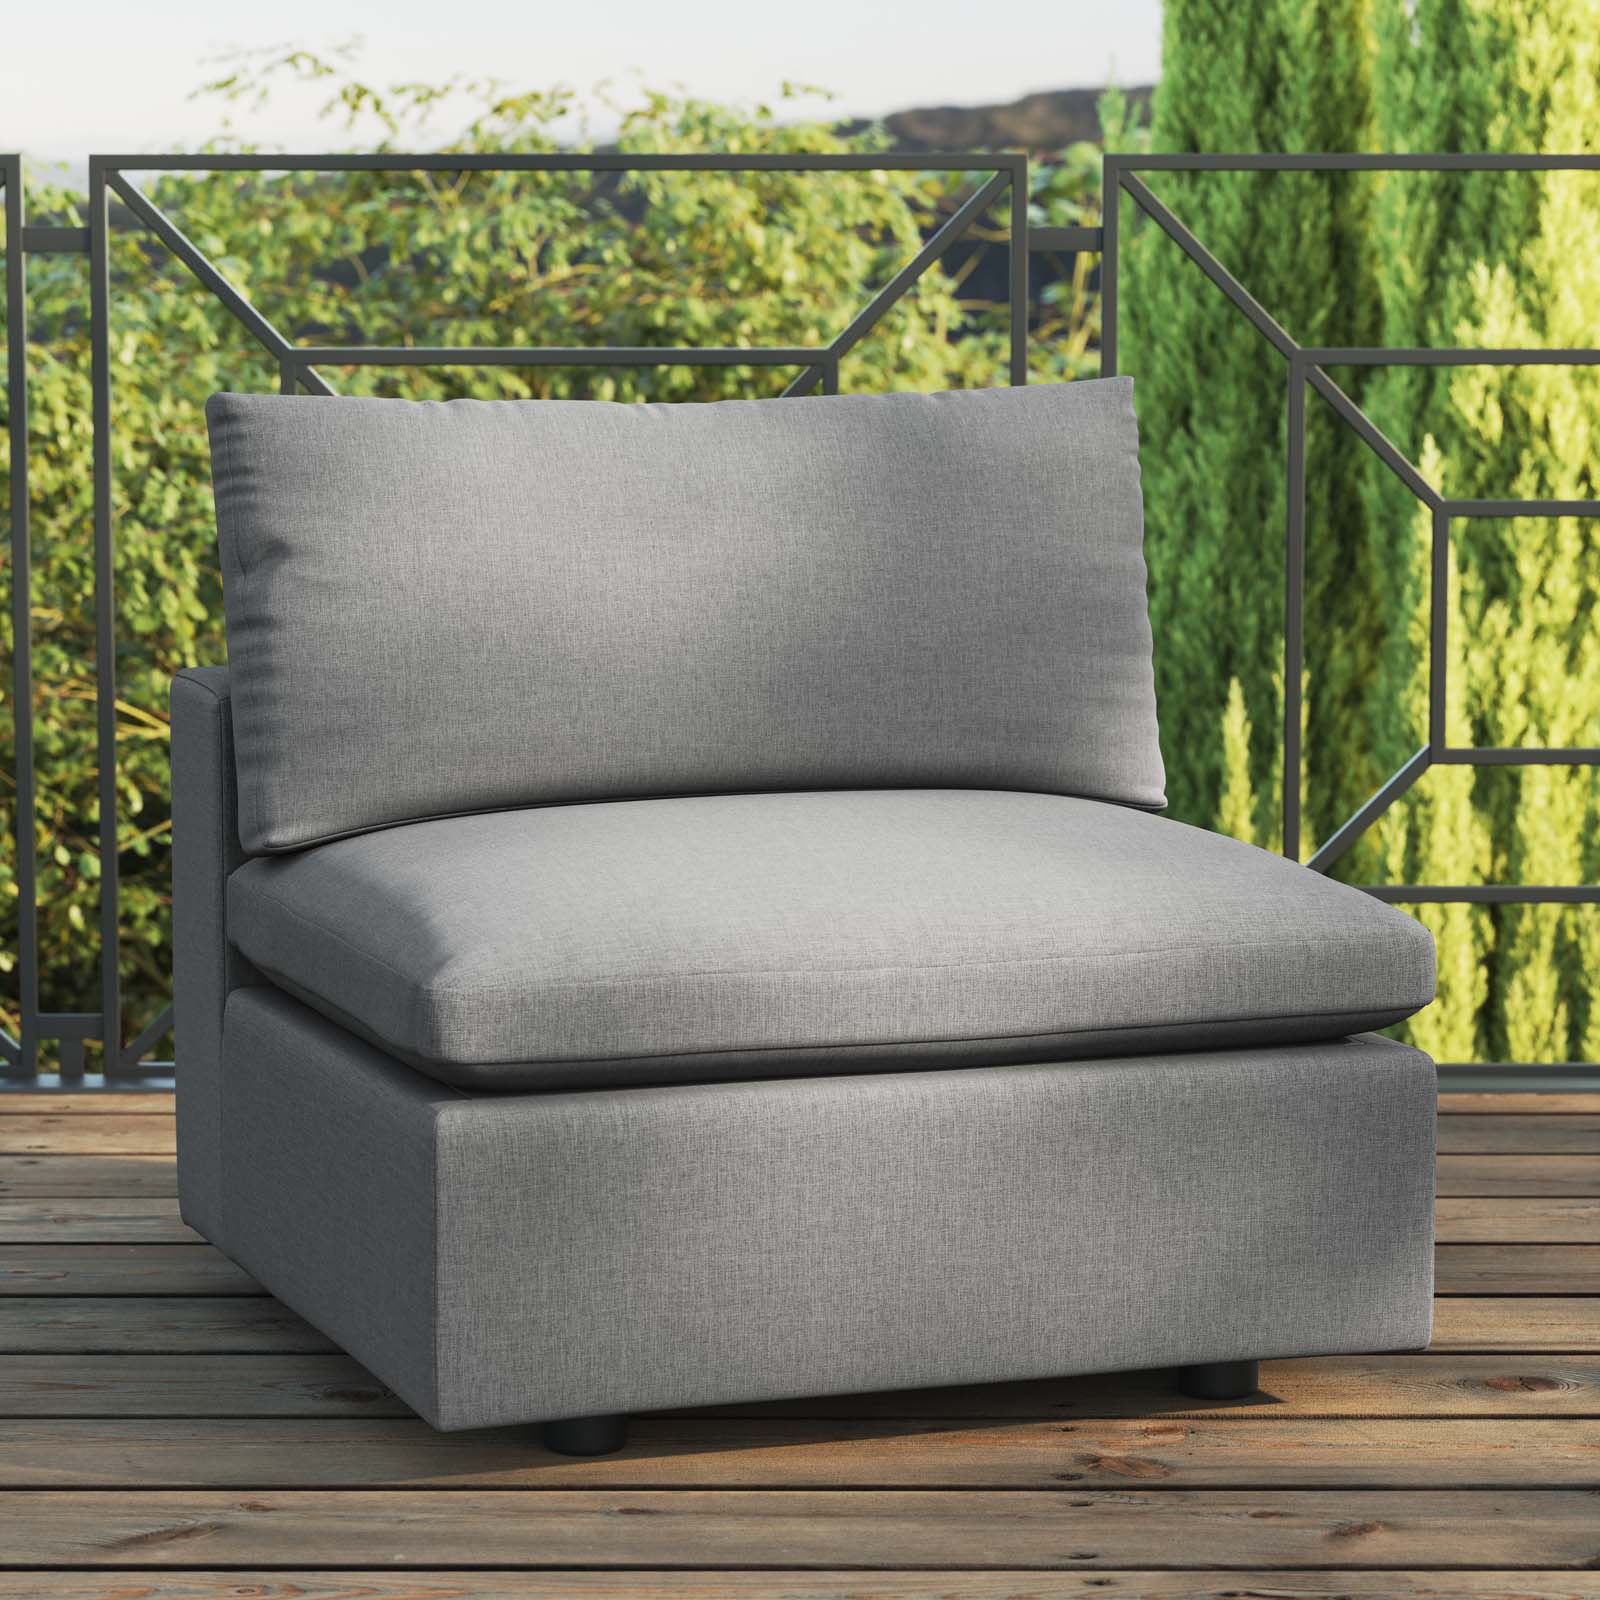 Modway Outdoor Chairs - Commix Overstuffed Outdoor Patio Armless Chair Charcoal